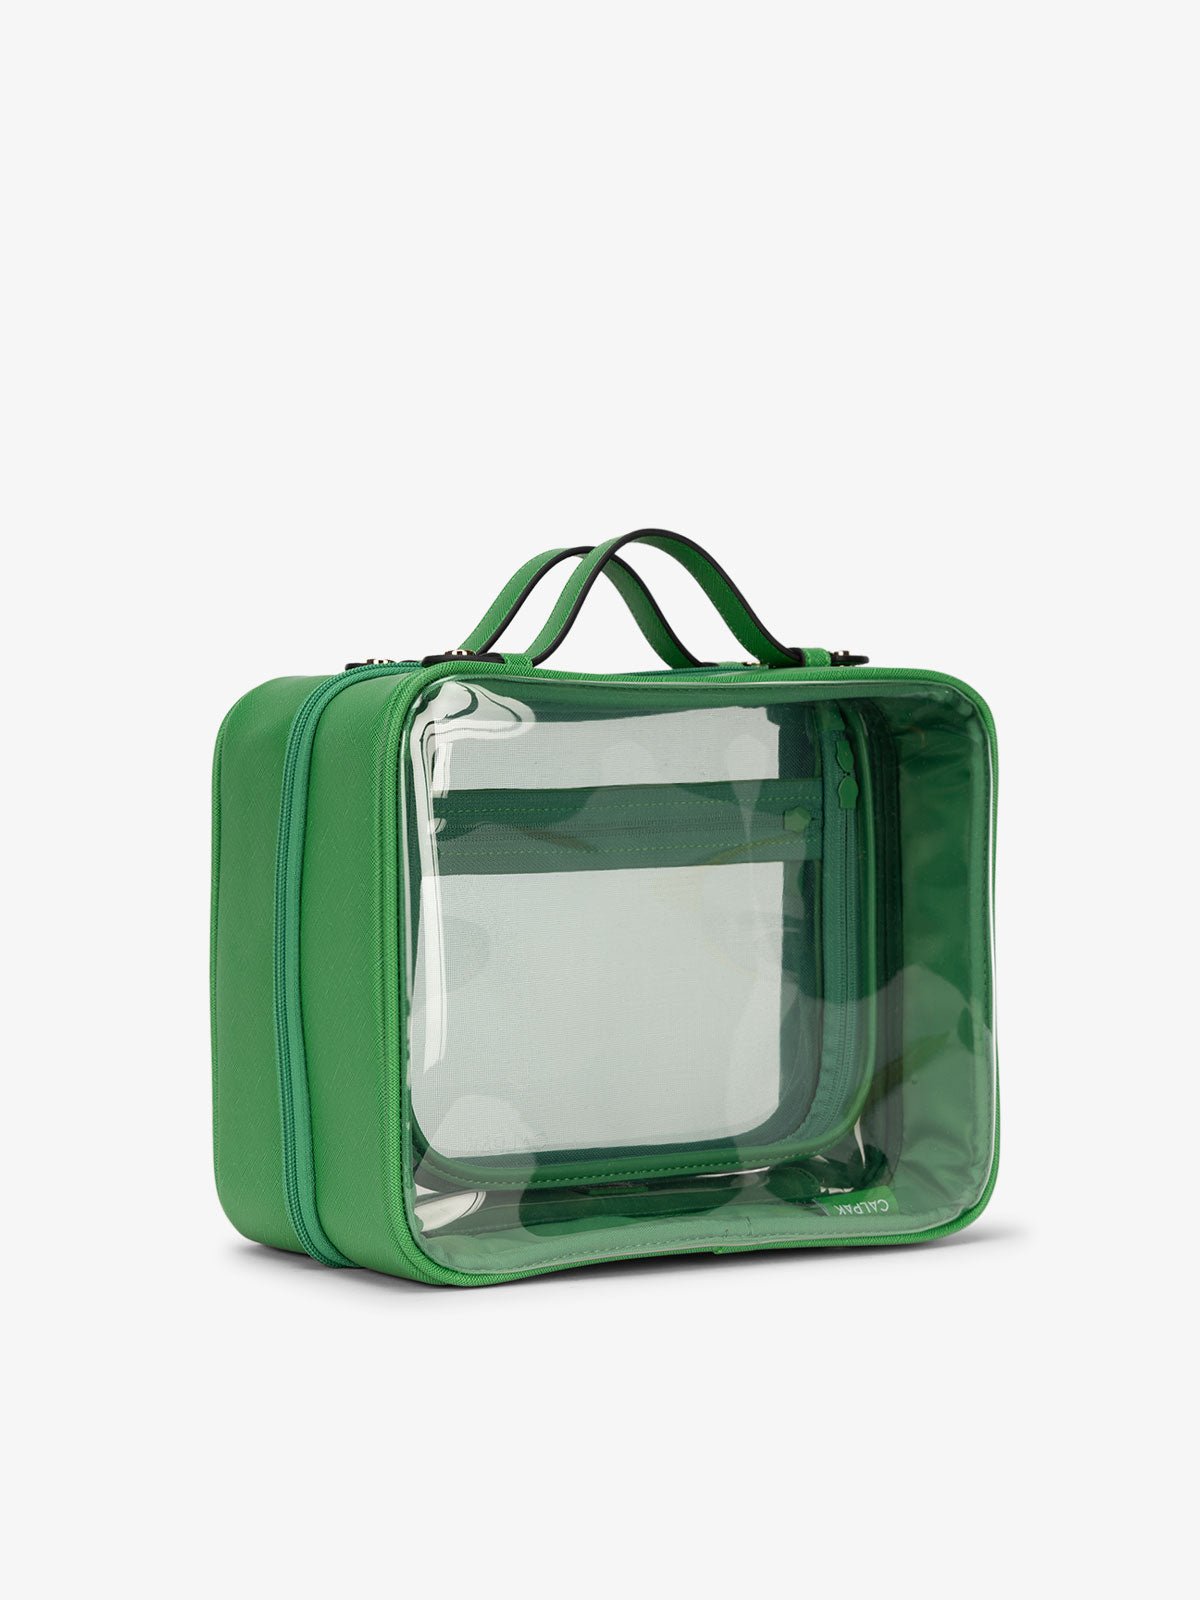 CALPAK large clear skincare bag with multiple zippered compartments in green